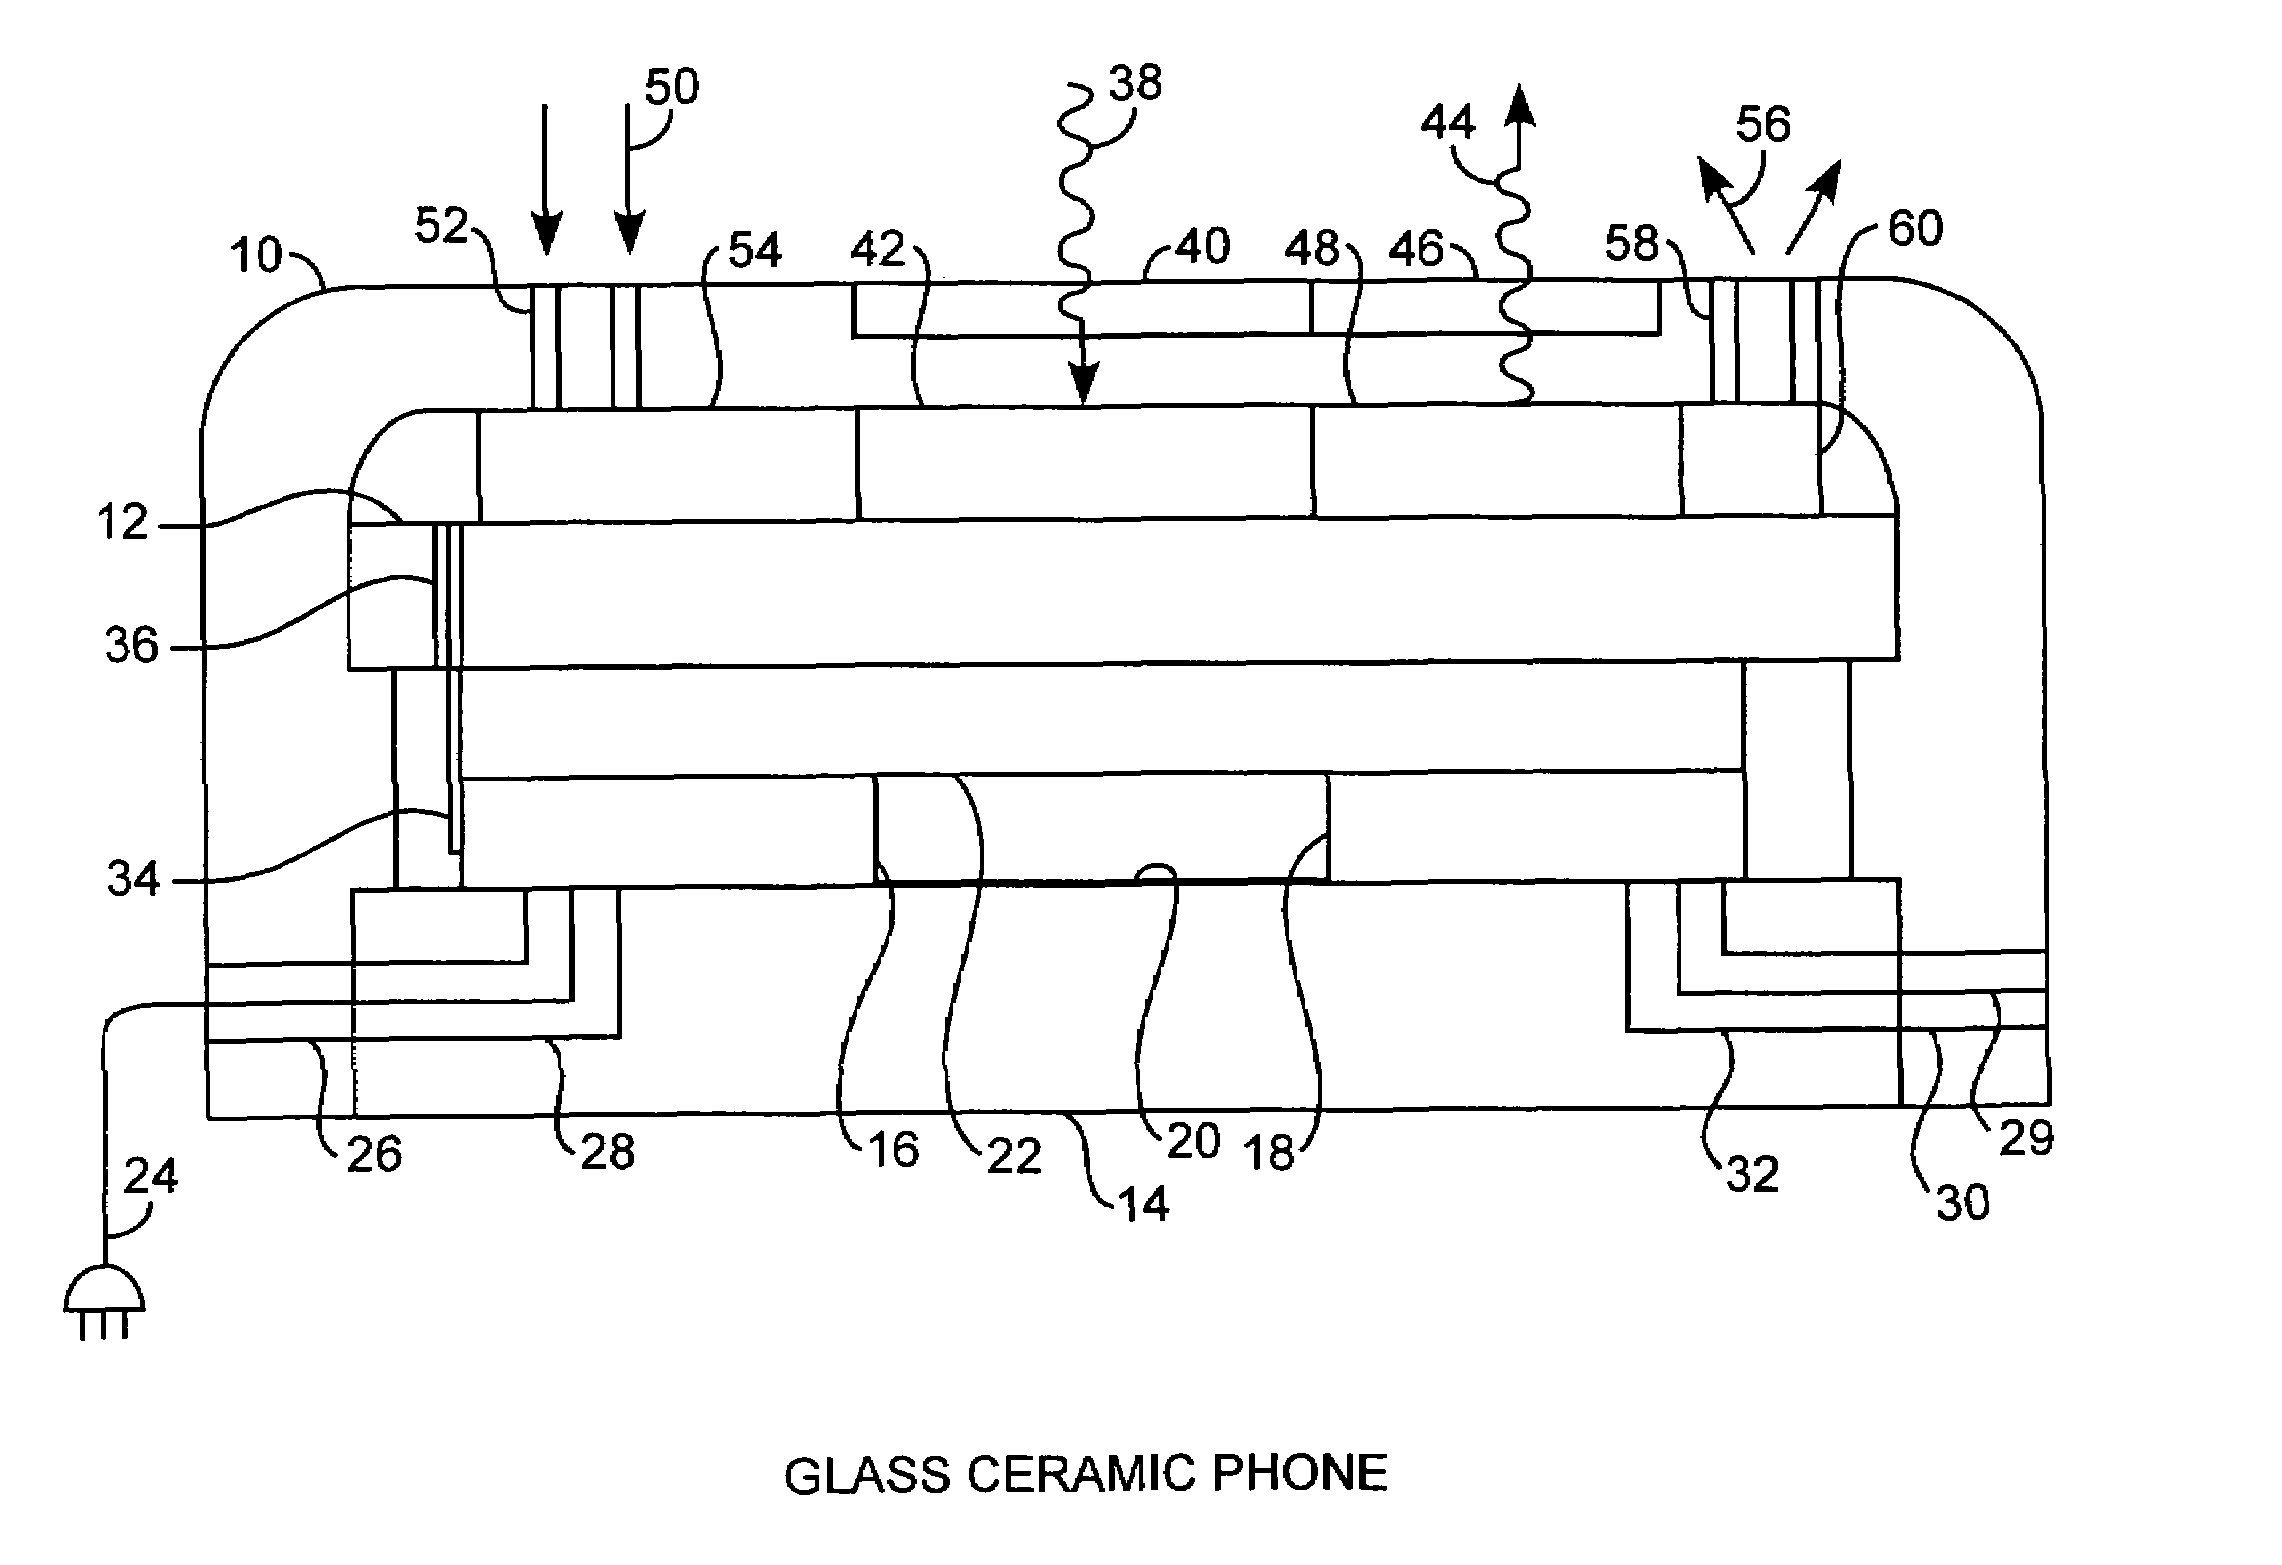 Integrated glass ceramic systems